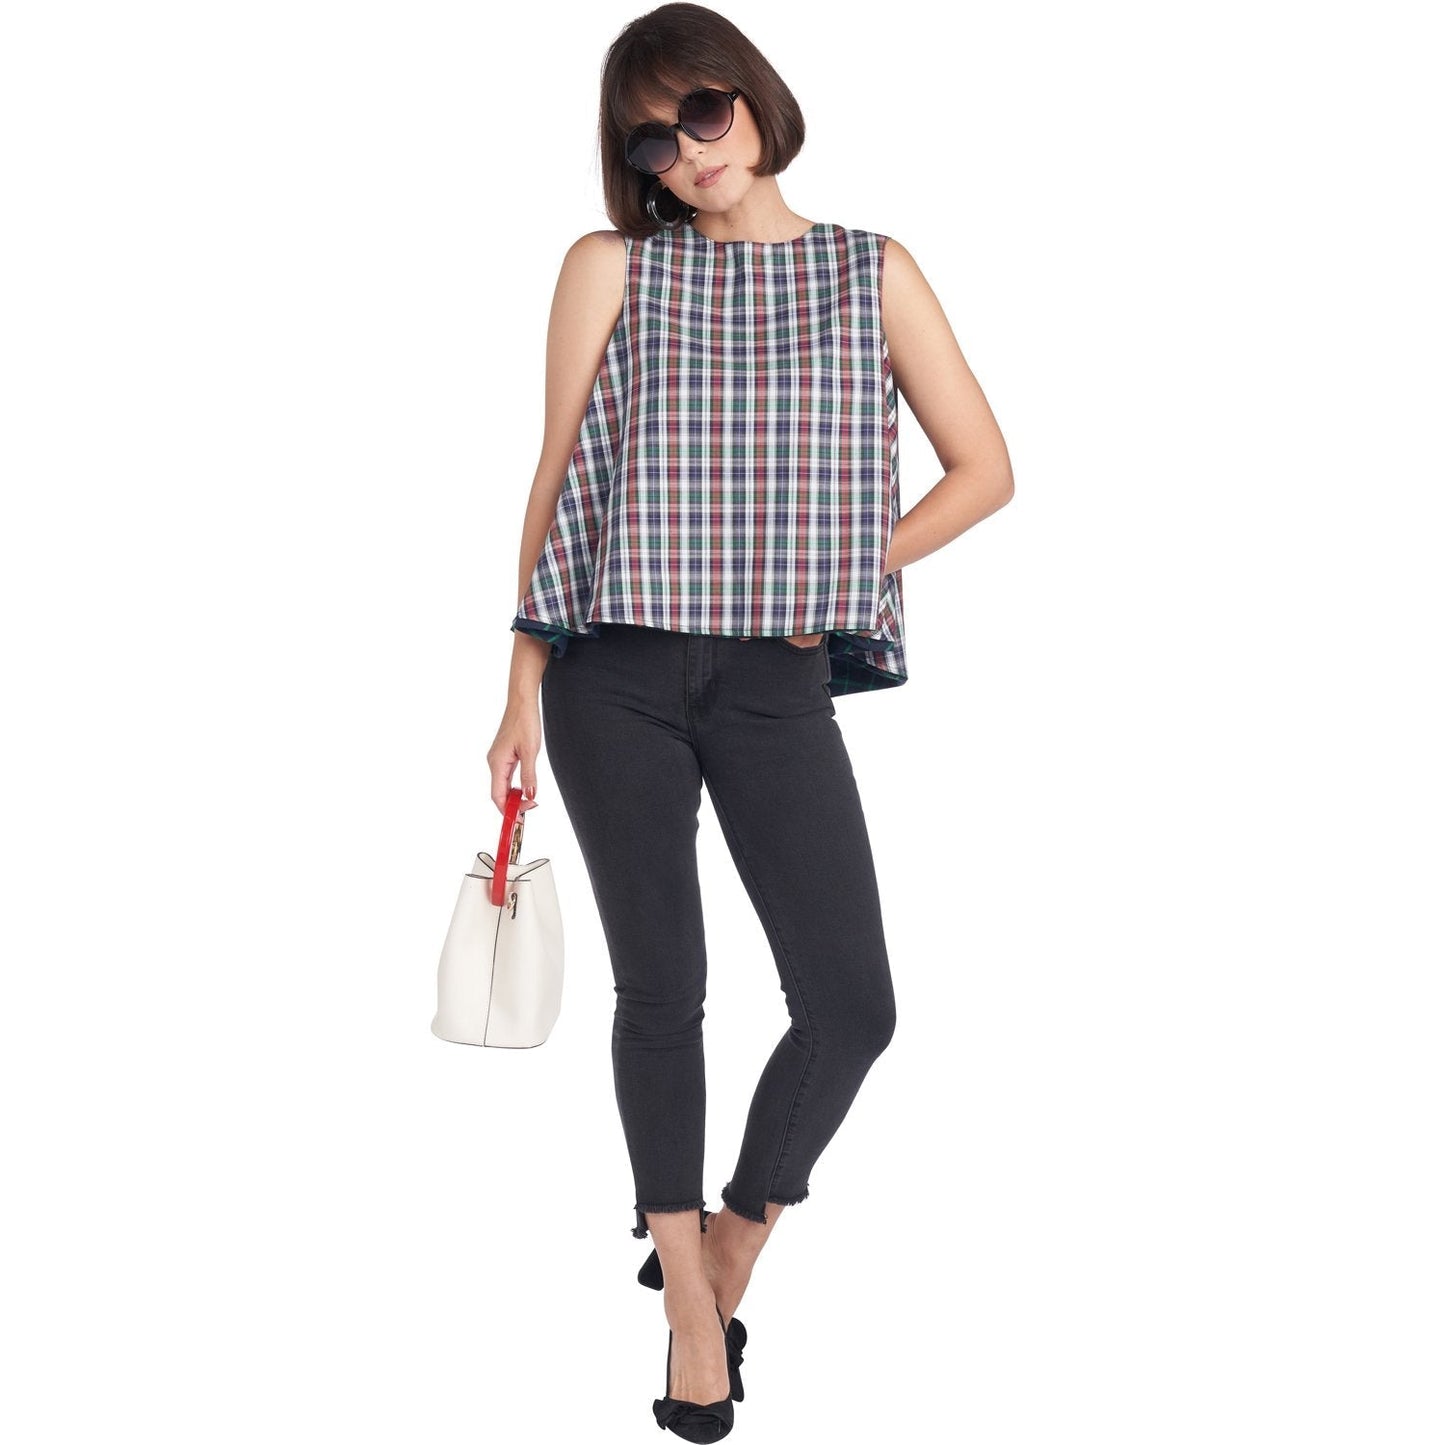 Reversible Swing Top -  Mixed Plaid - Final Sale